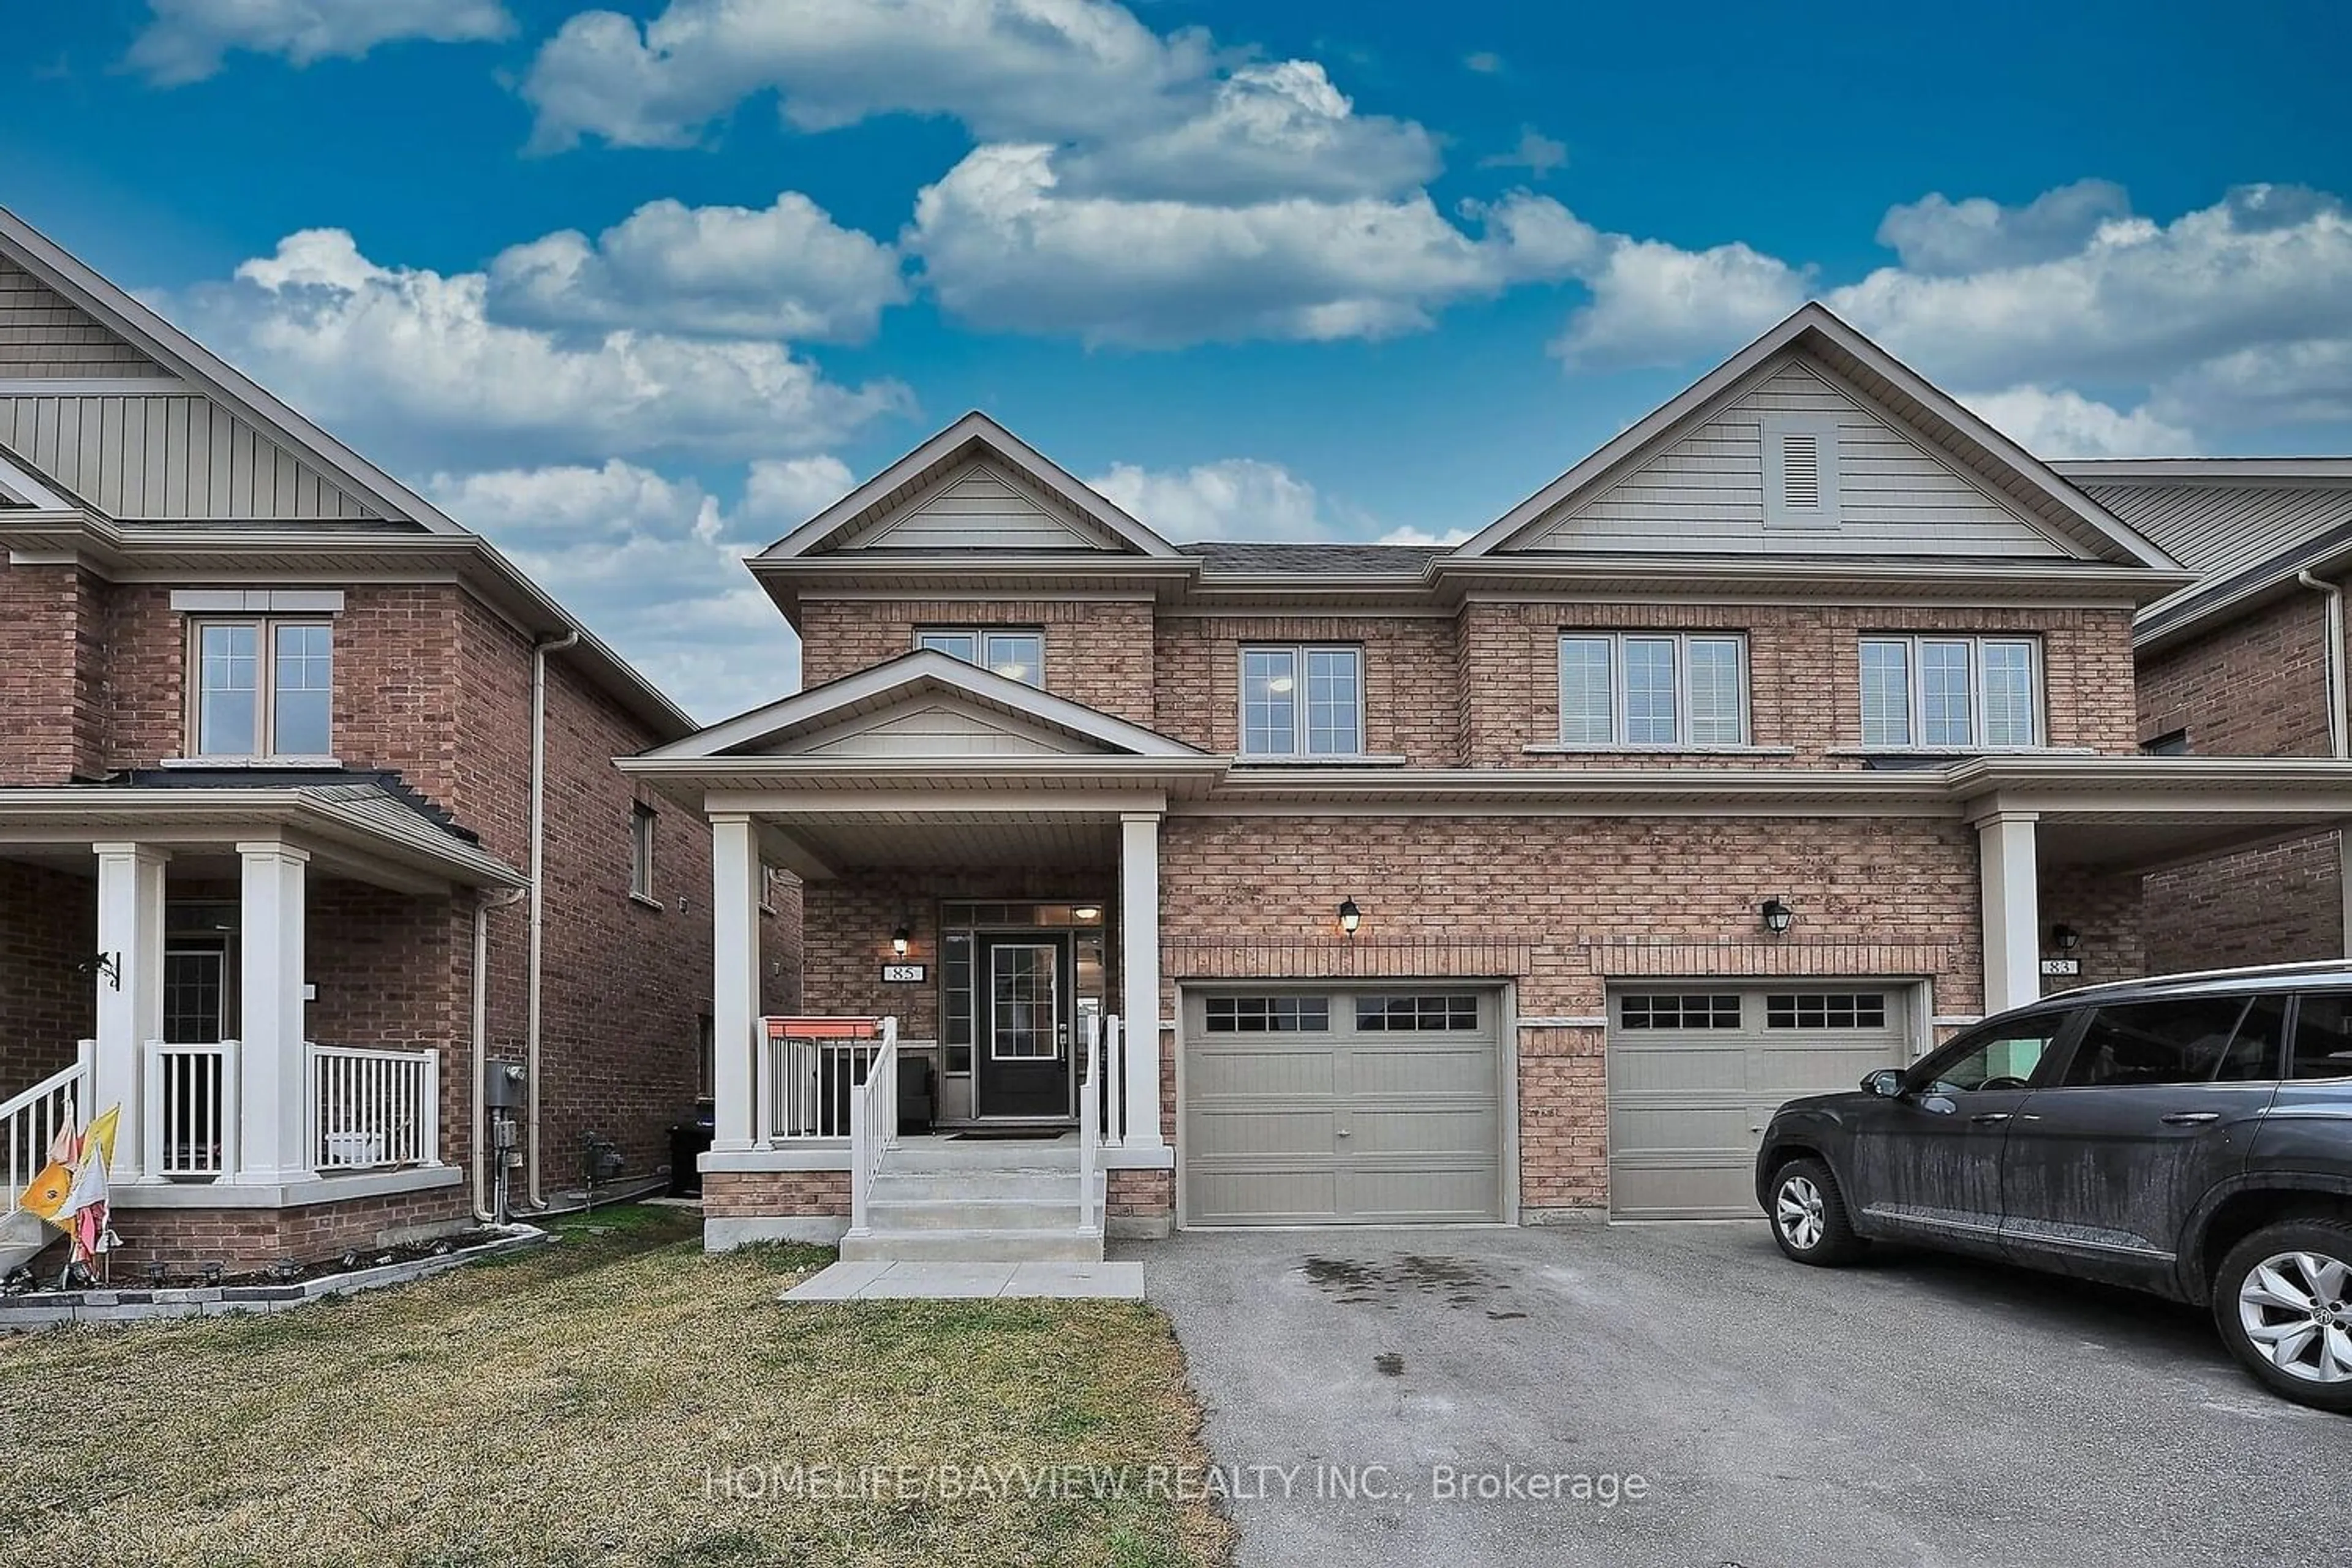 Home with brick exterior material for 85 Casserley Cres, New Tecumseth Ontario L0G 1W0